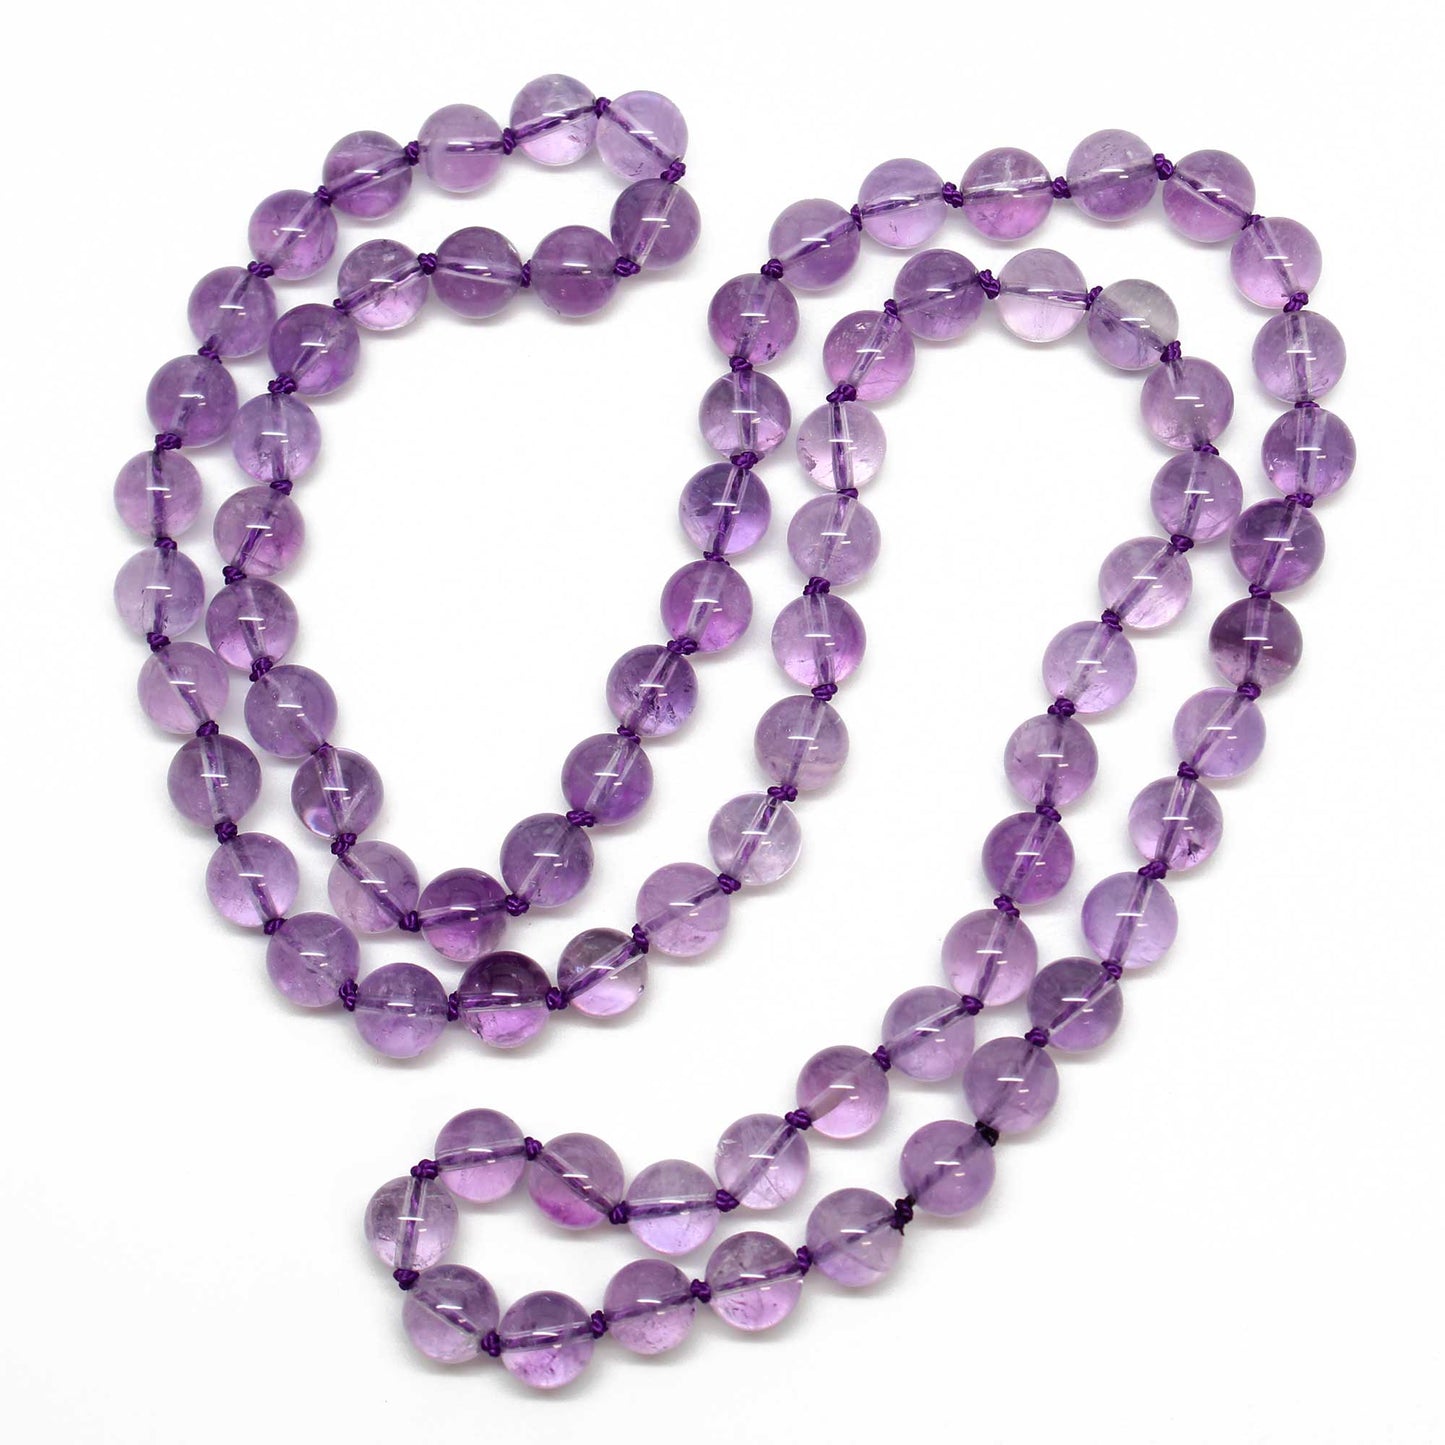 Hand Knotted Genuine Amethyst Bead Necklace